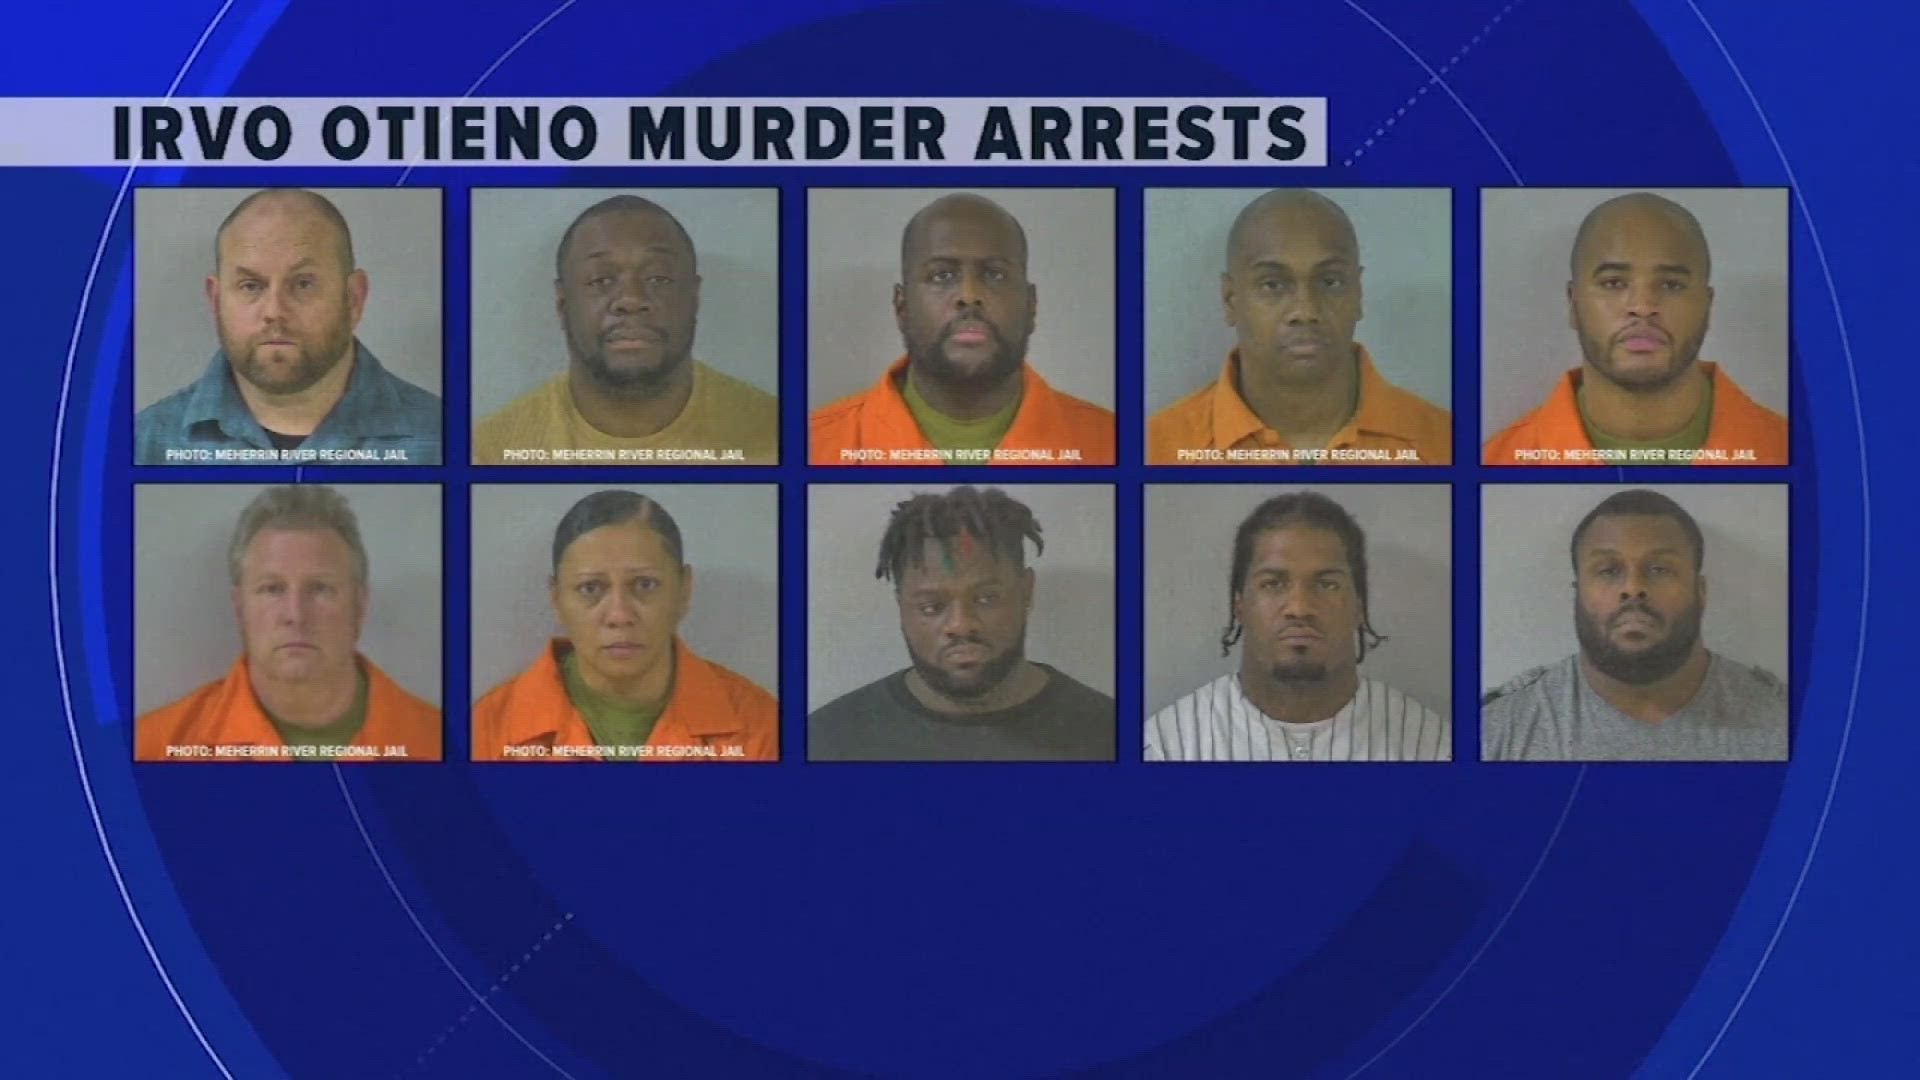 All 10 suspects are charged with 2nd degree murder.